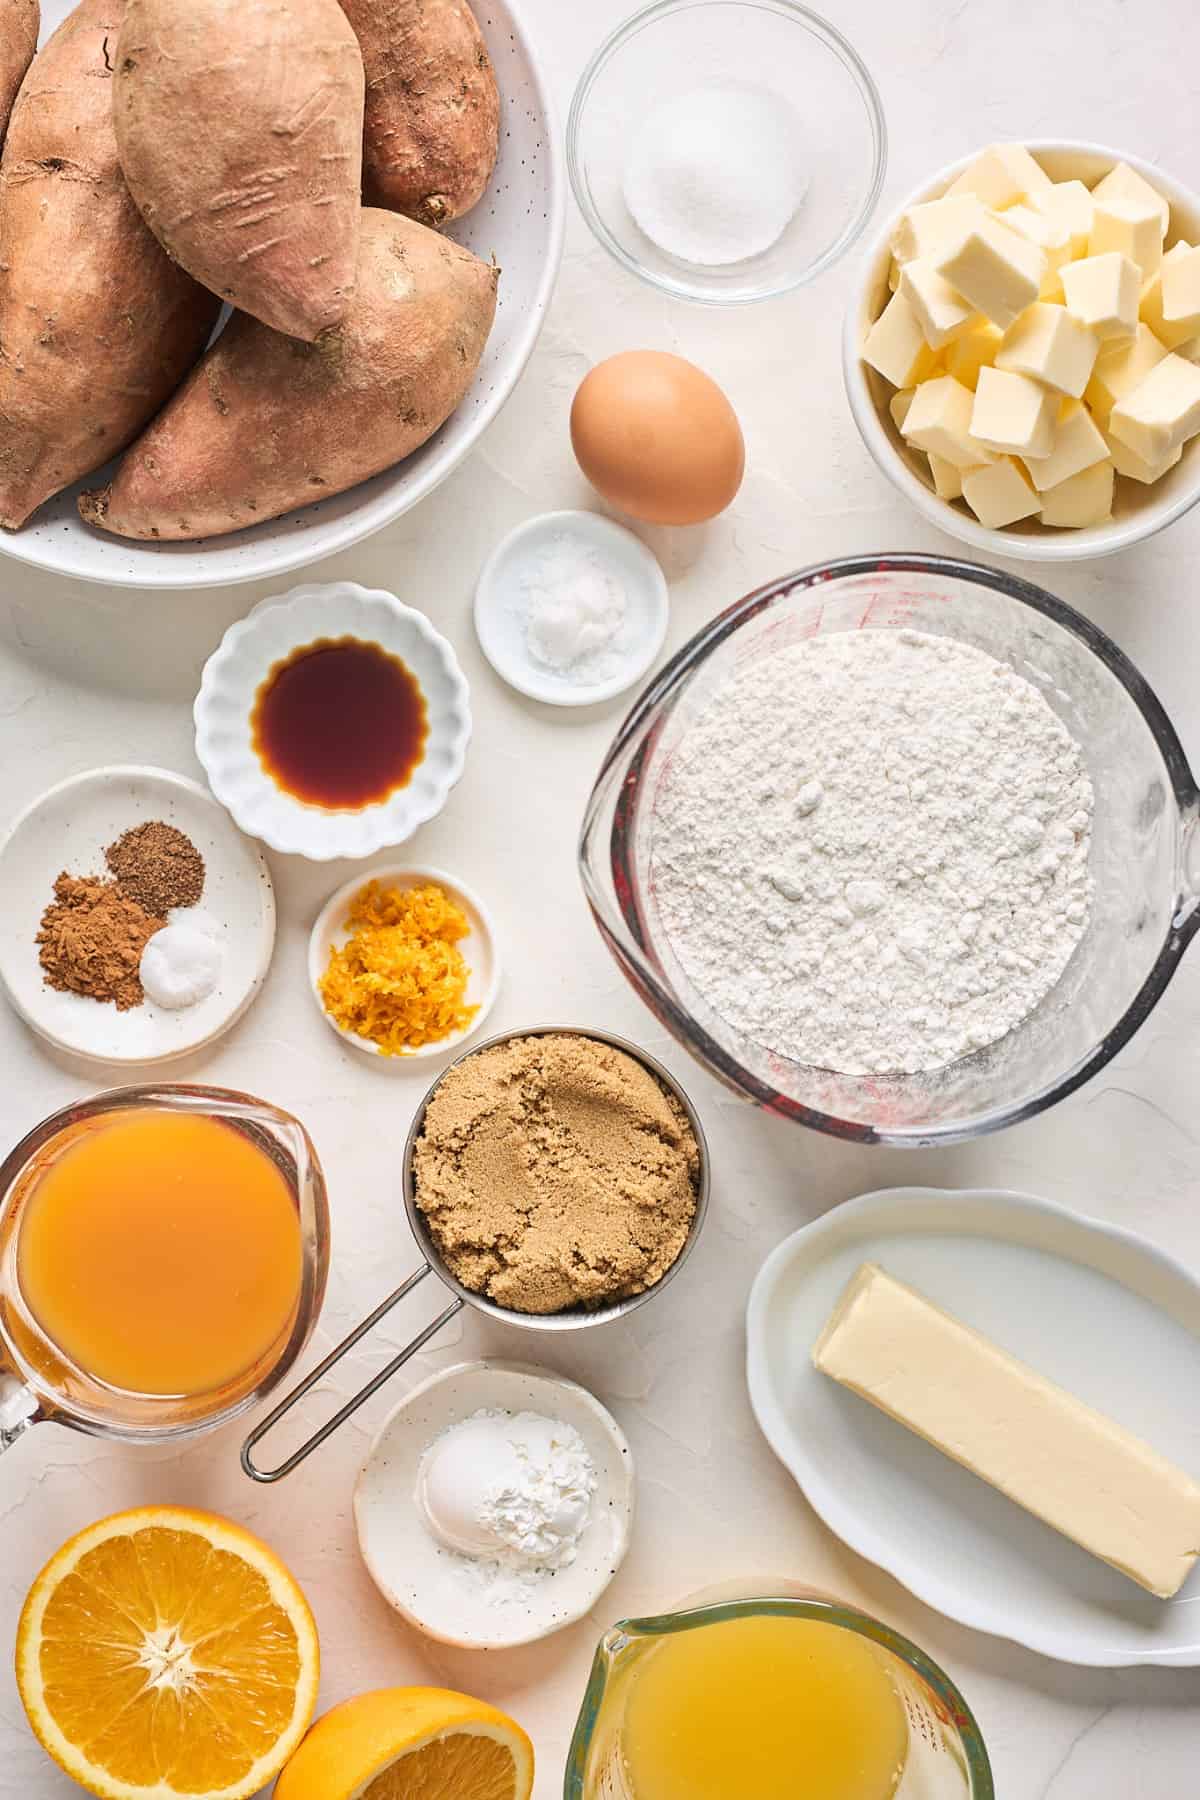 Ingredients to make sweet potato cobbler in small bowls on a white surface